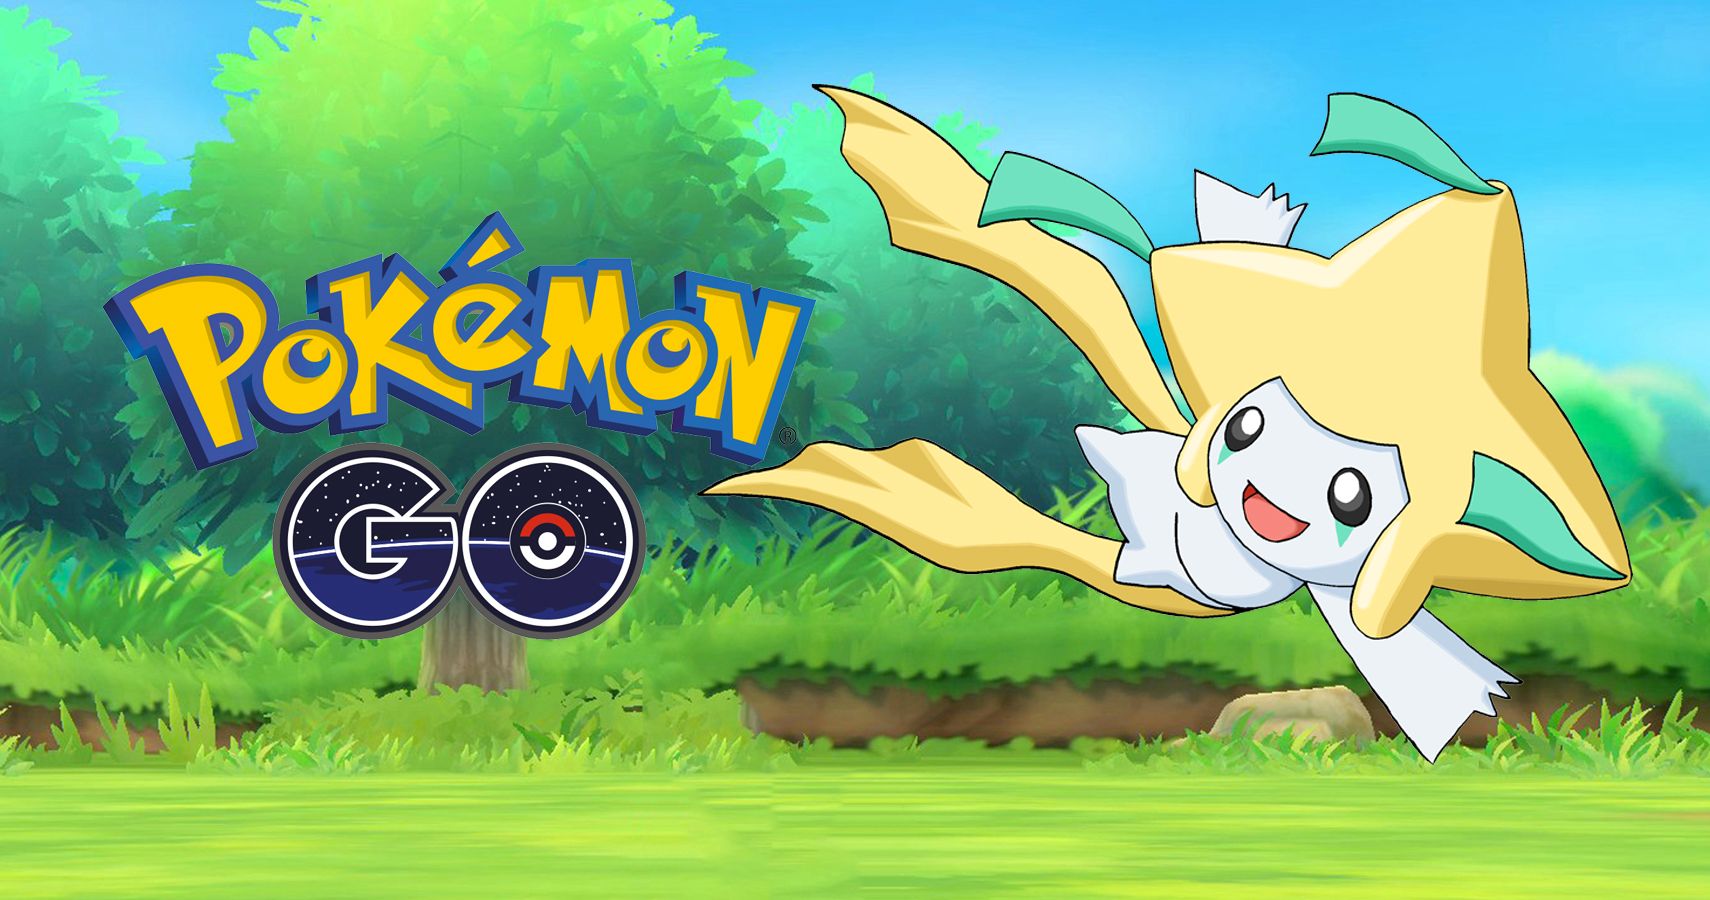 Jirachi Could Be Coming To Pokémon GO Soon